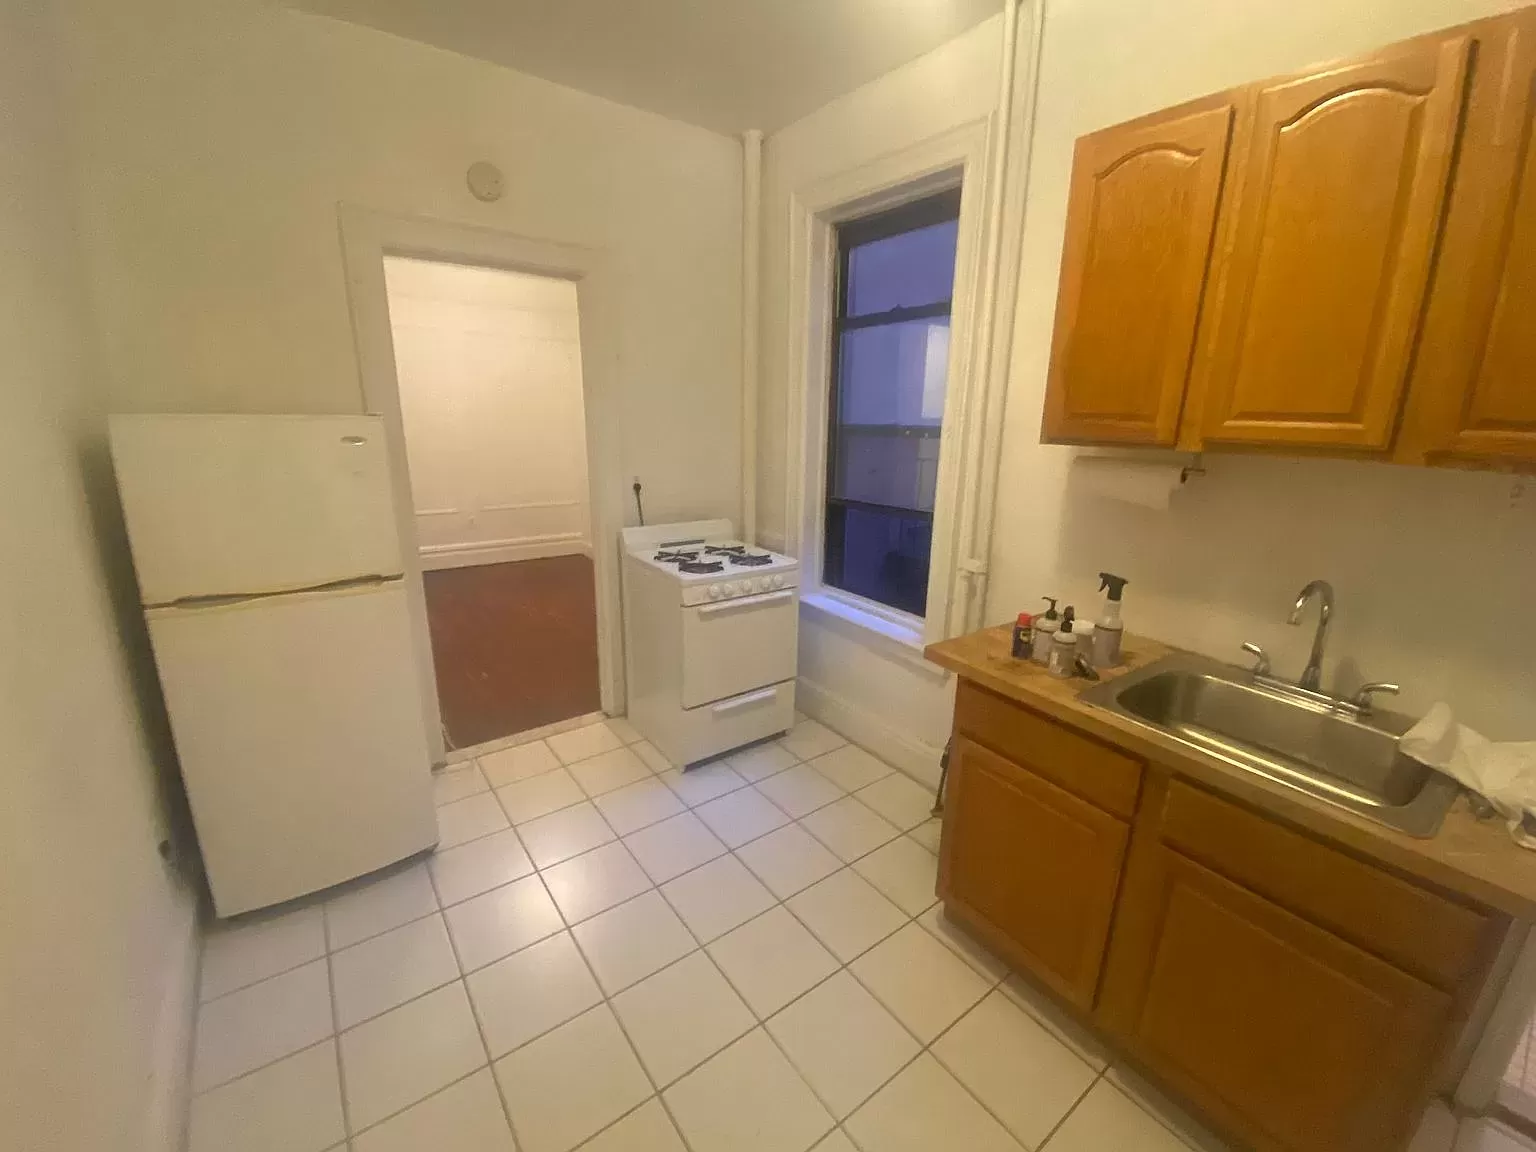 Apartment for Rent in Boerum Hill, Brooklyn NY